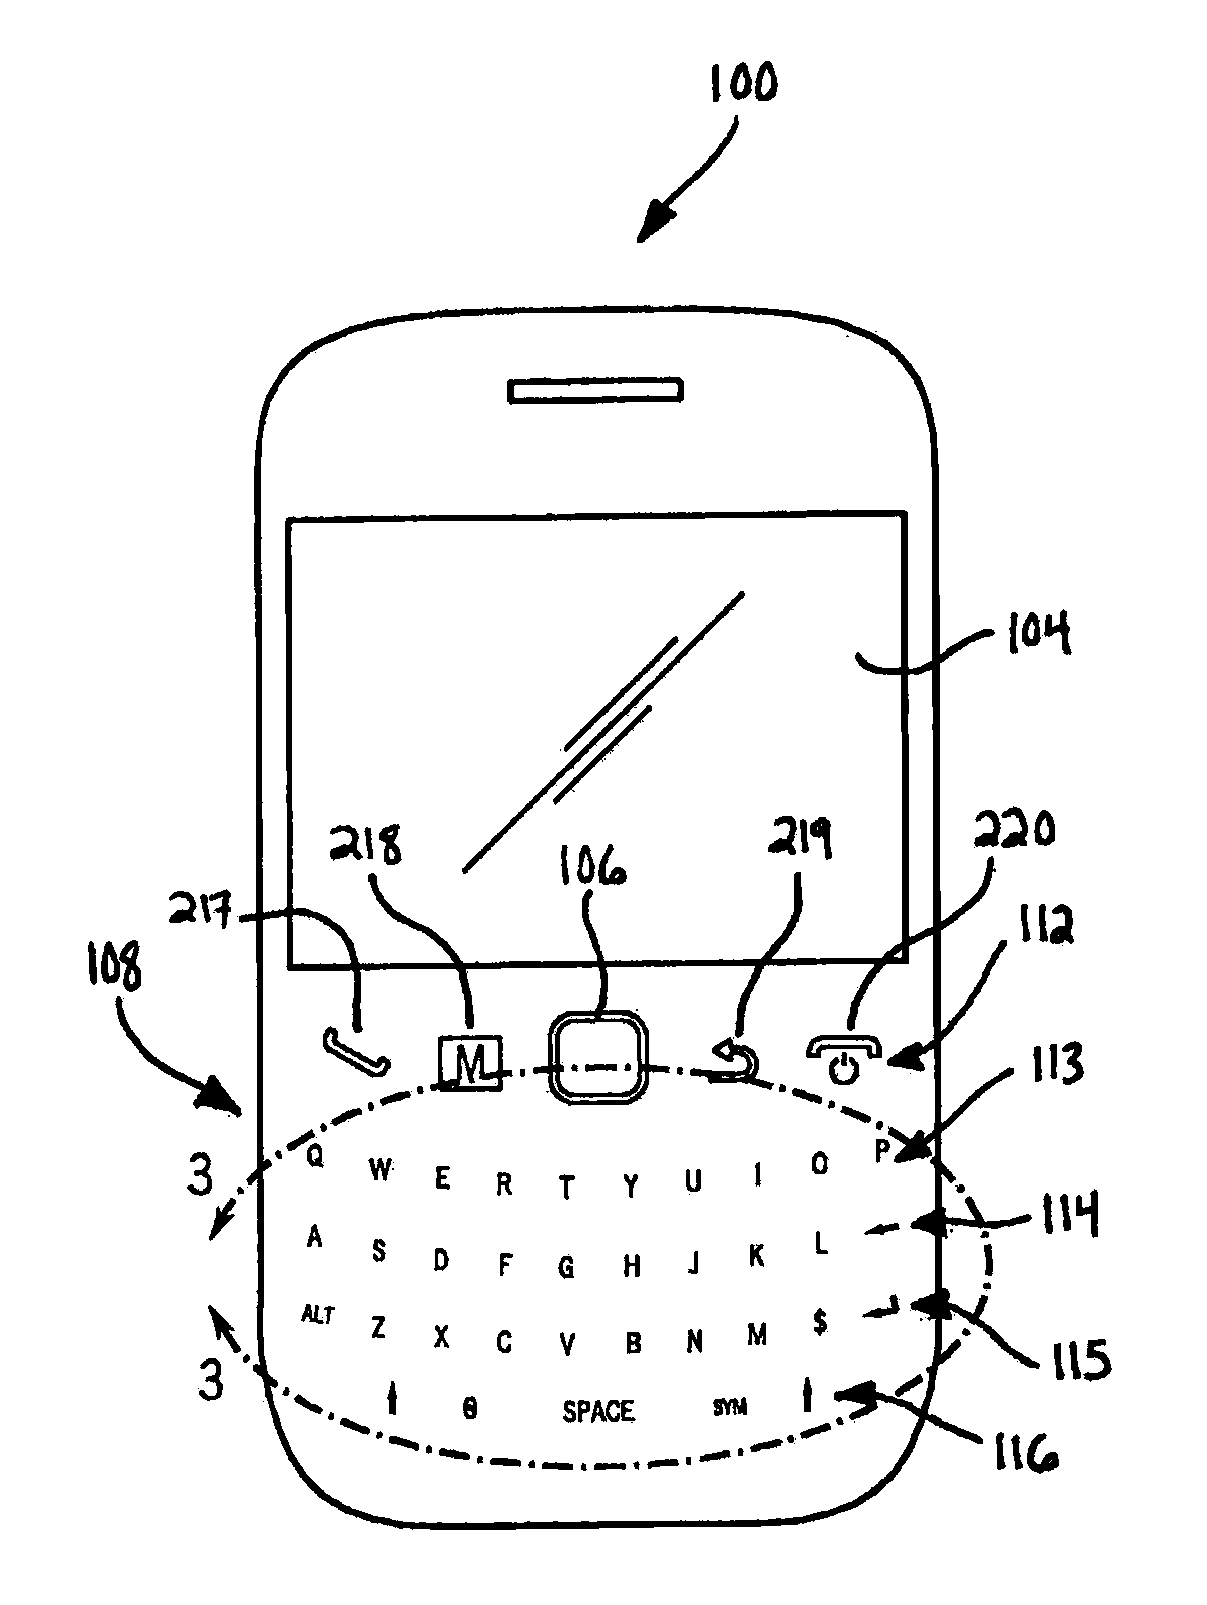 Electronic mobile device having a keypad assembly with a film overlay